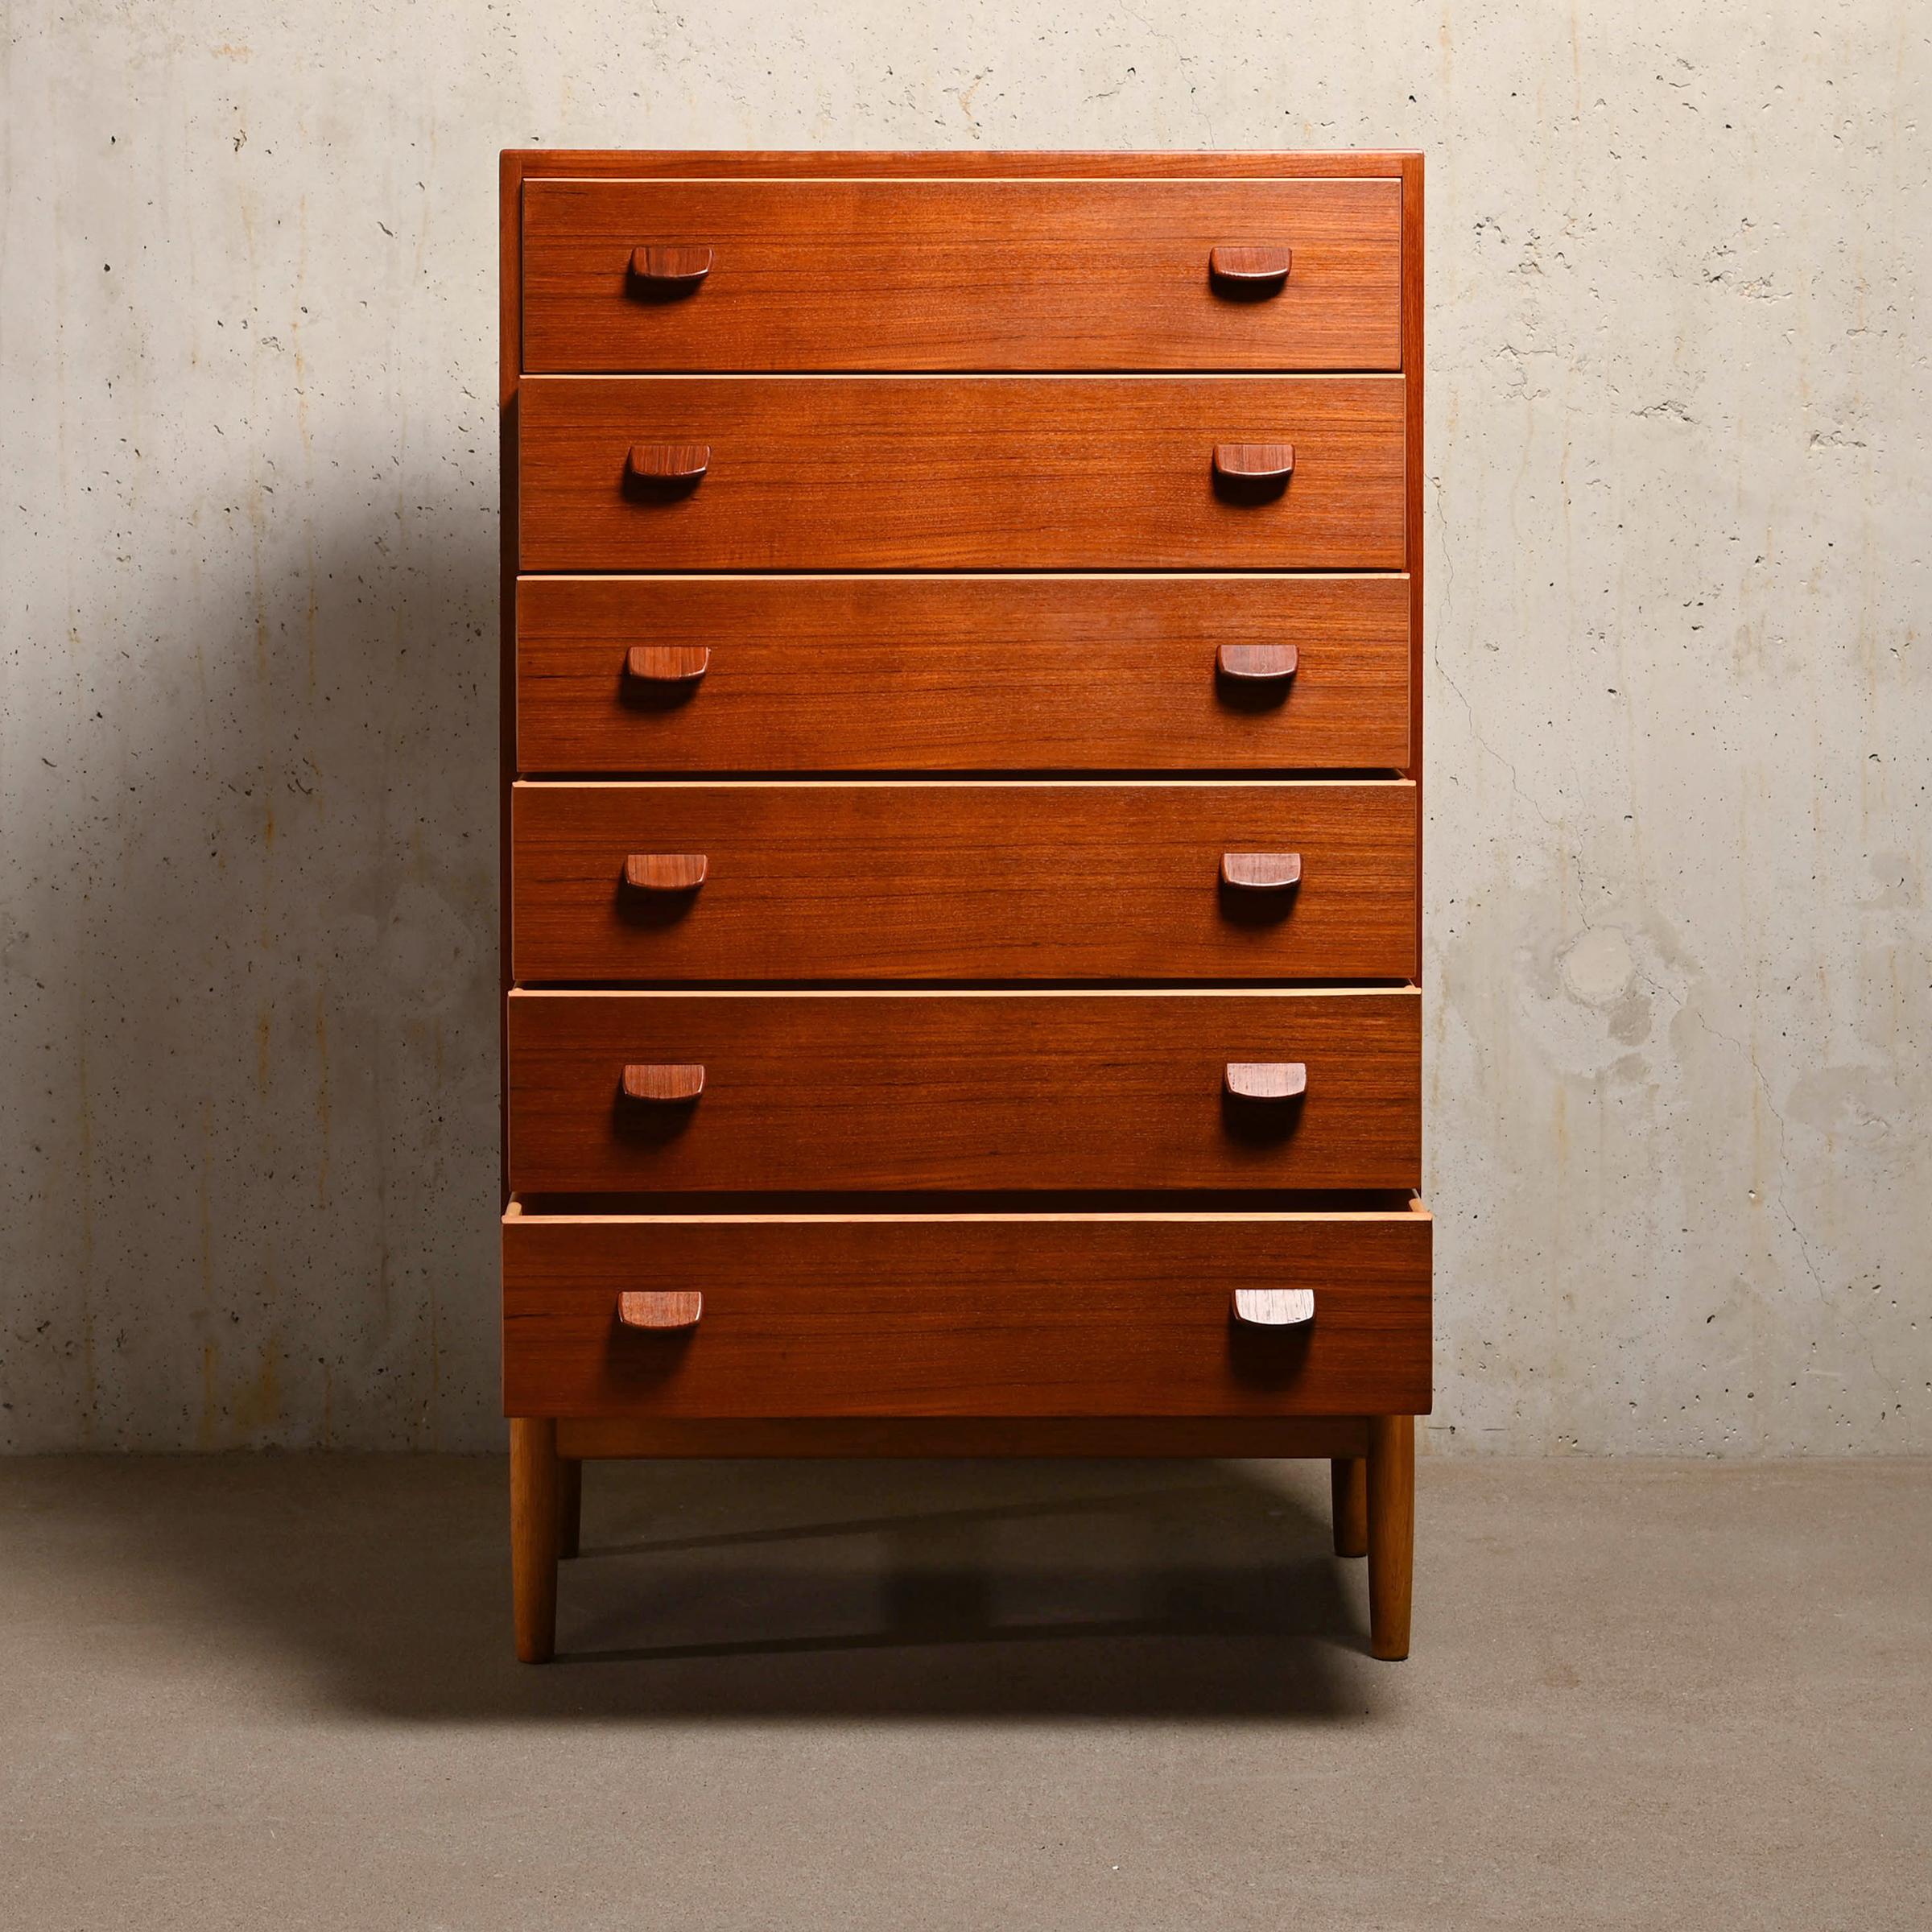 Scandinavian Modern Poul Volther Chest of Drawers, Model F17 in teak and oak for FDB Møbler, Denmark